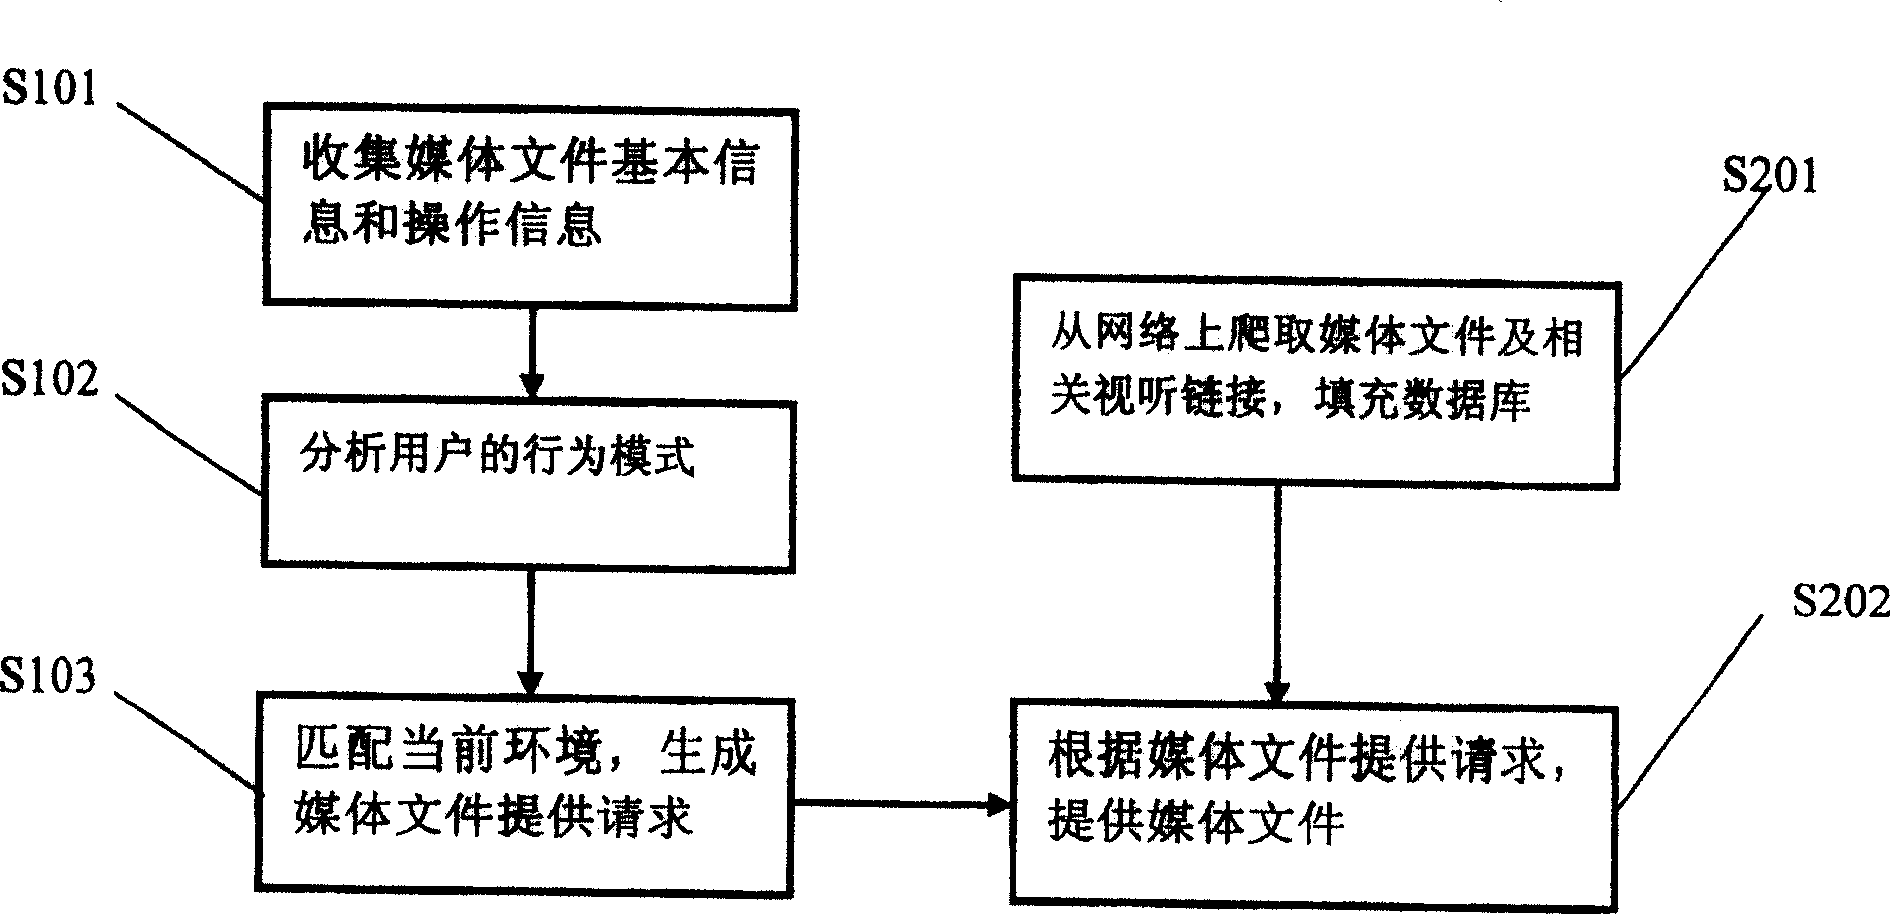 Media file playing system and method